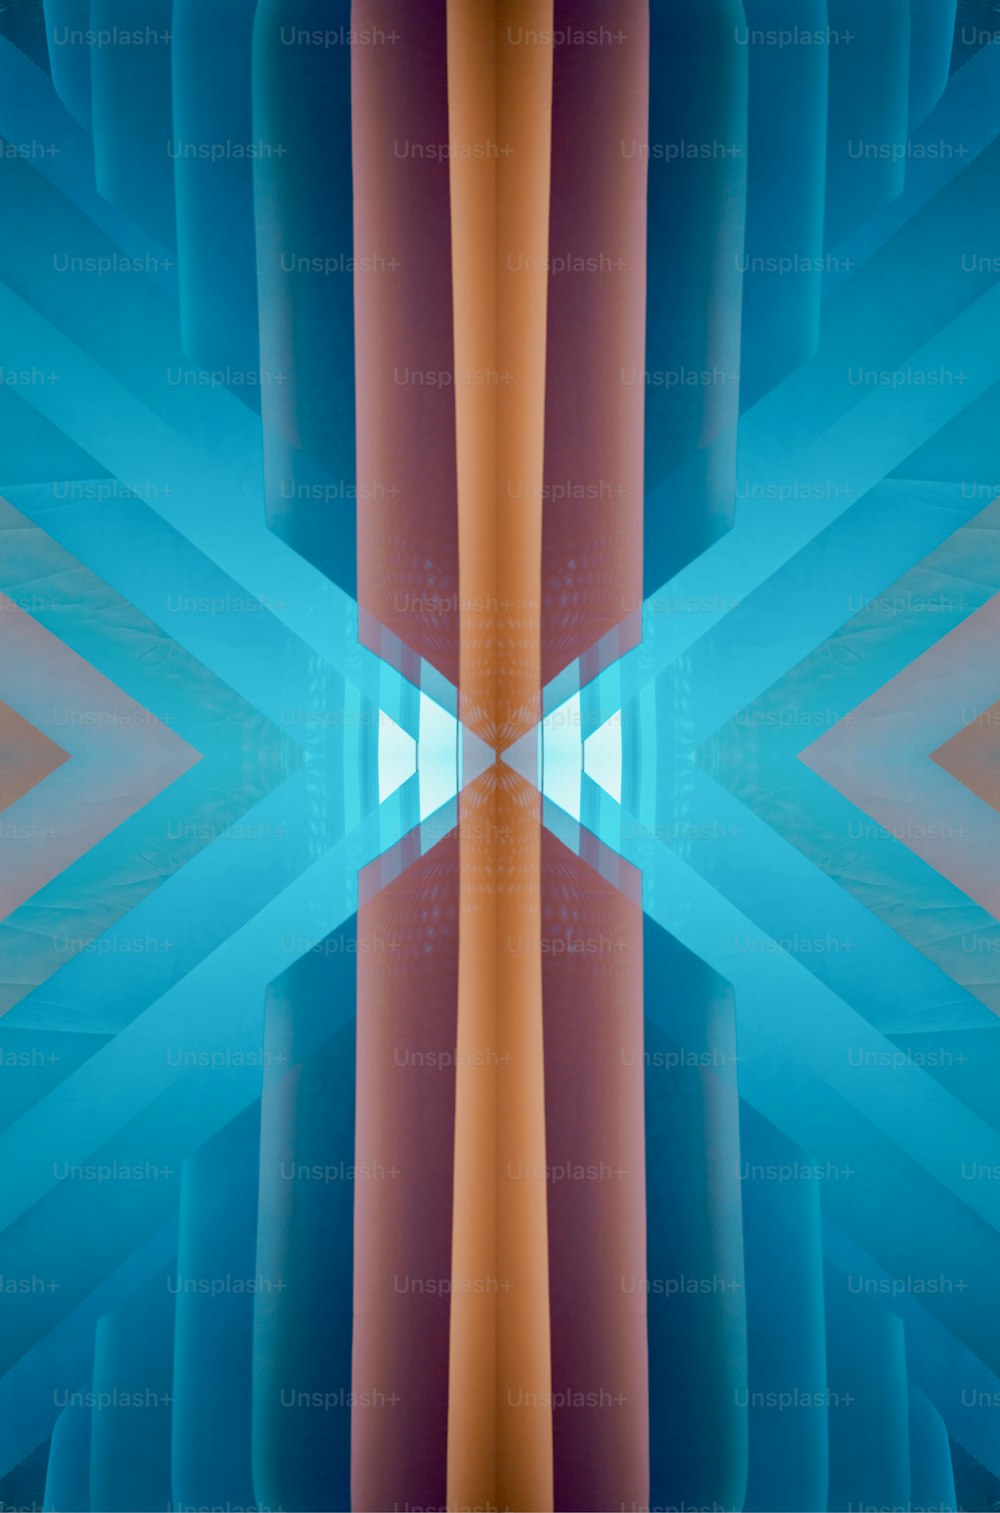 an abstract image of a blue and orange design